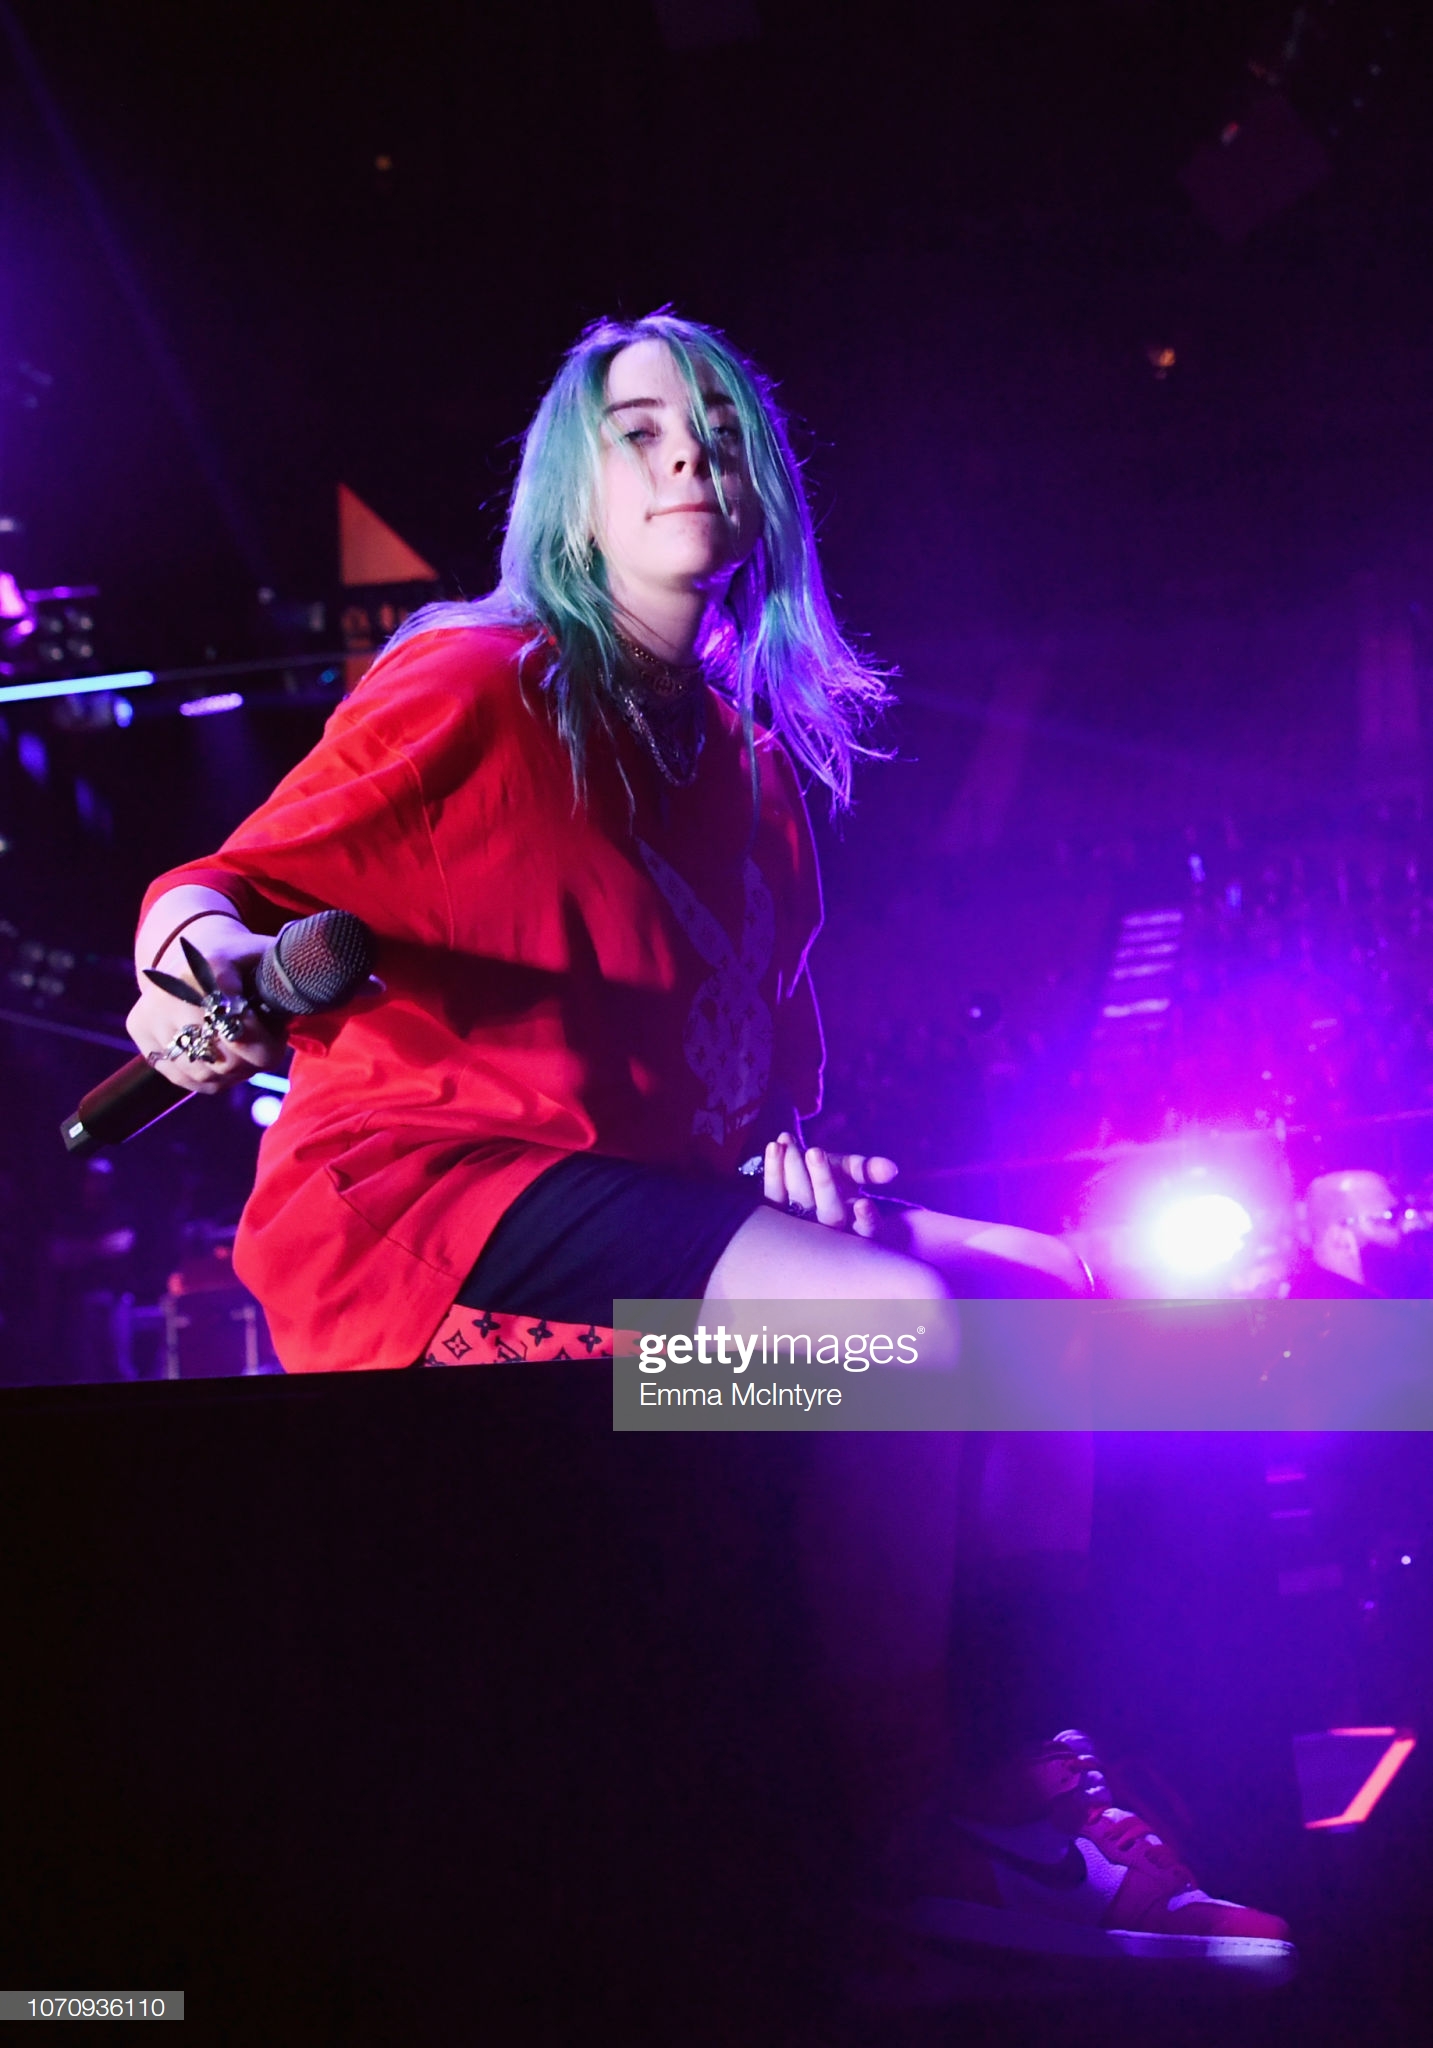 gettyimages-1070936110-2048x2048.jpg